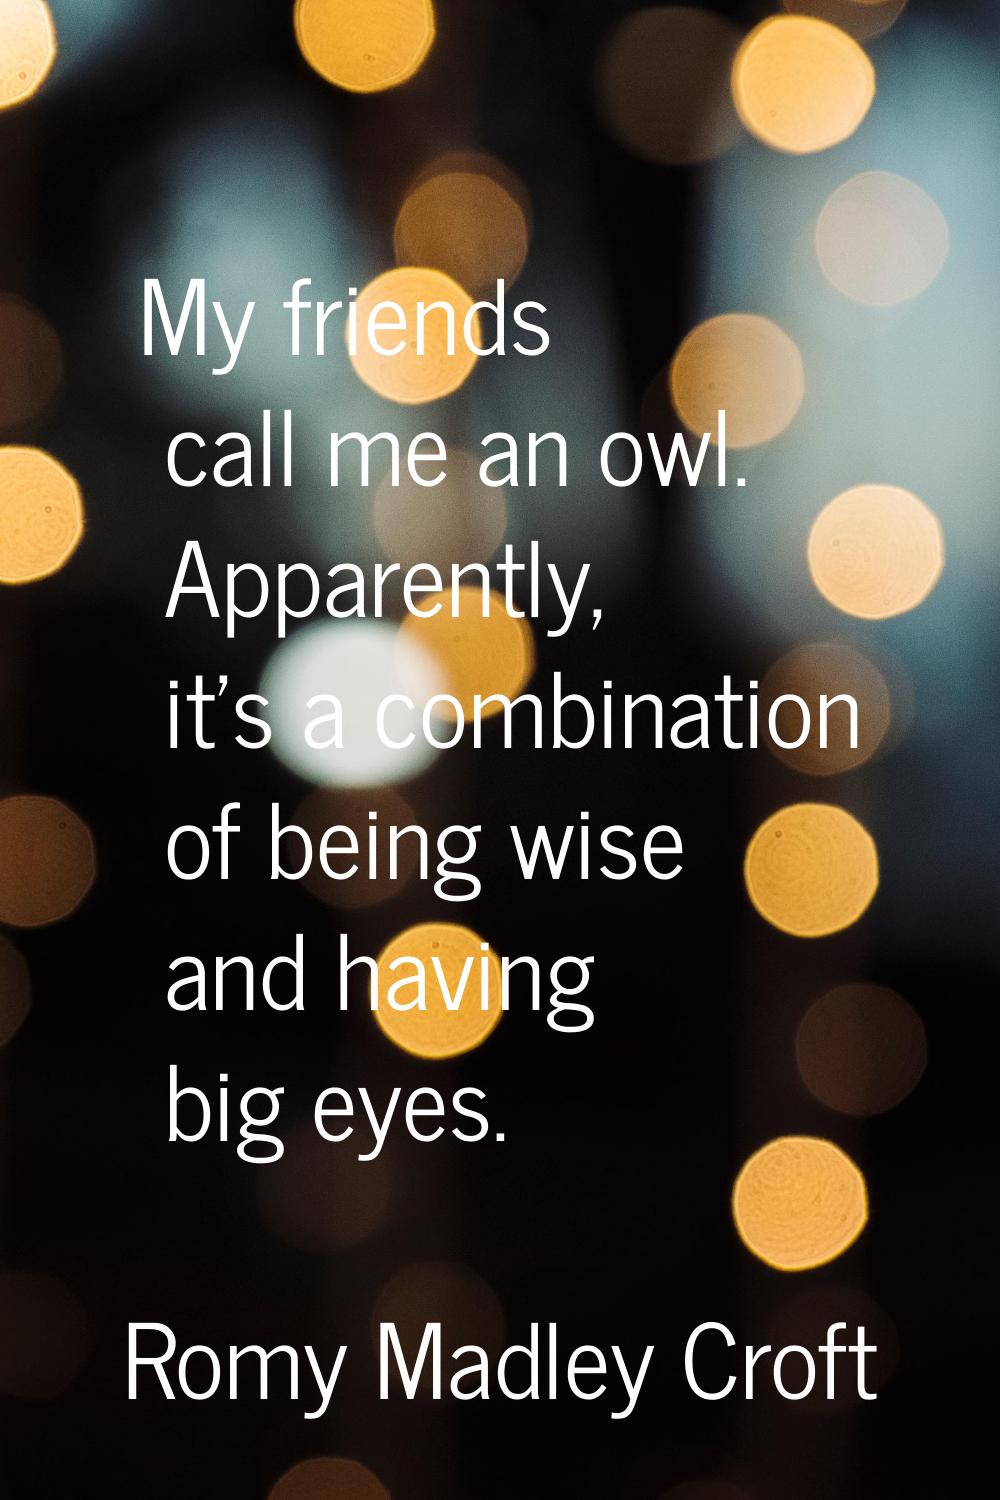 My friends call me an owl. Apparently, it's a combination of being wise and having big eyes.